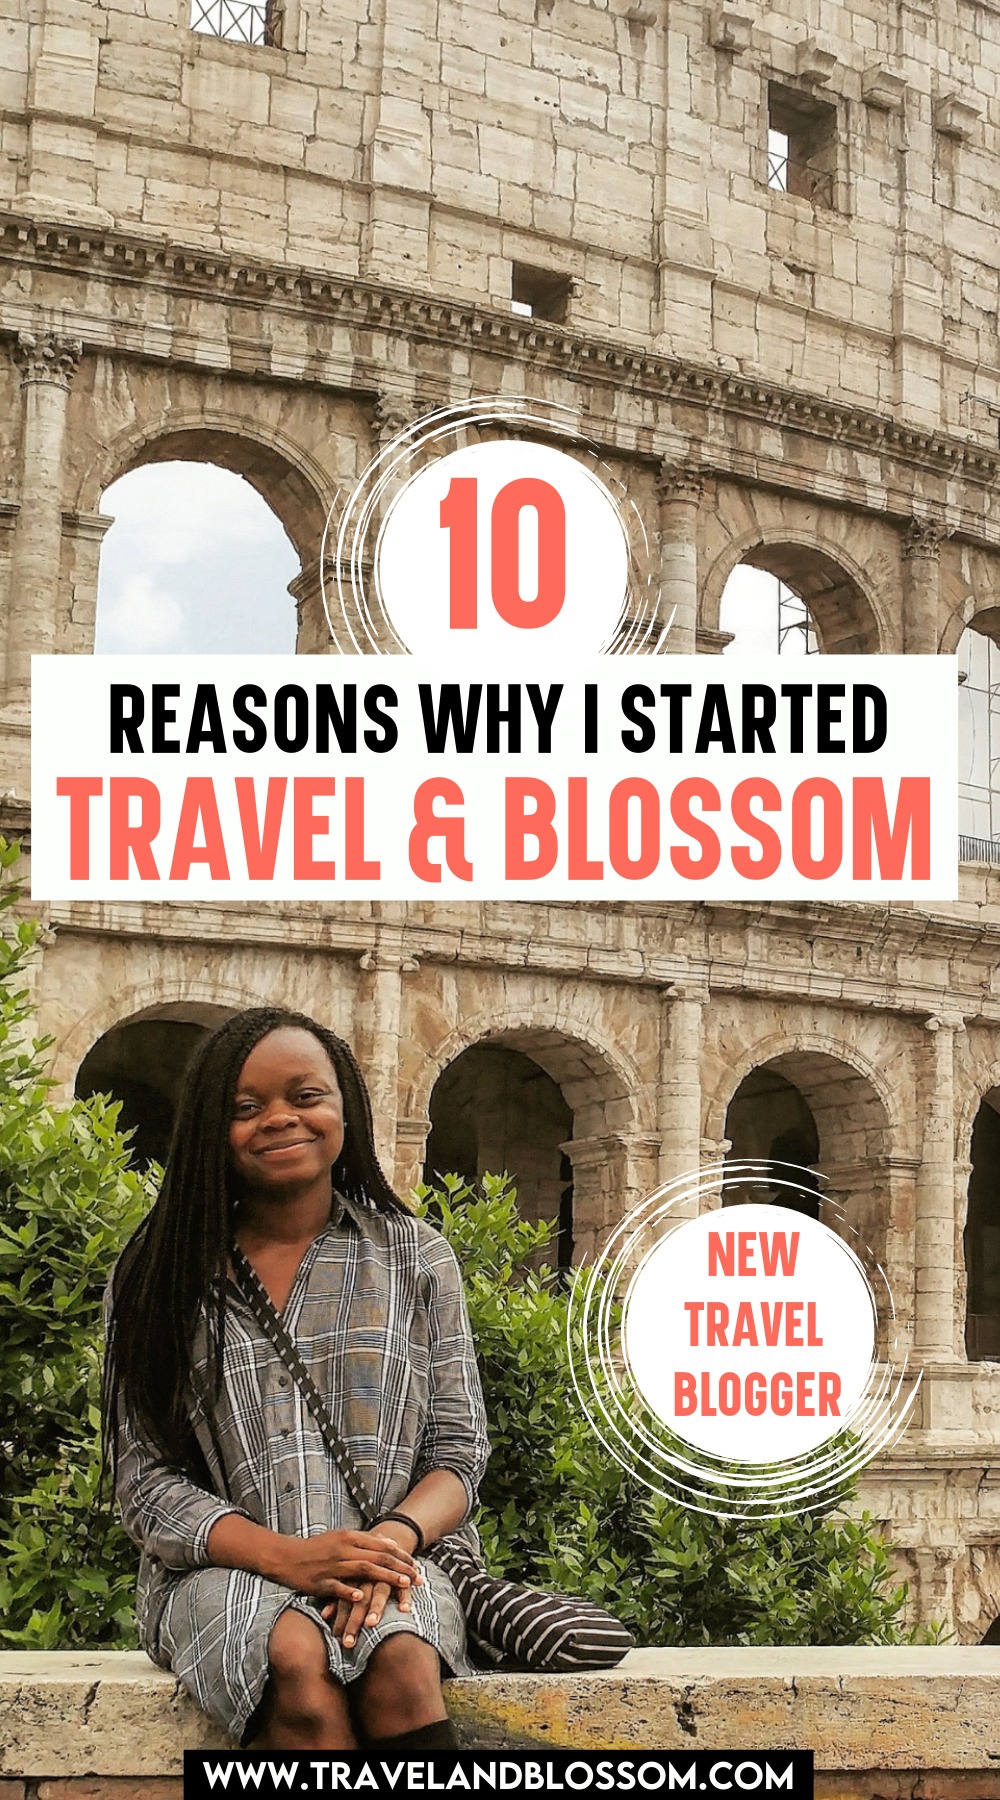 Here Are 10 Reasons Why I Started Travel and Blossom